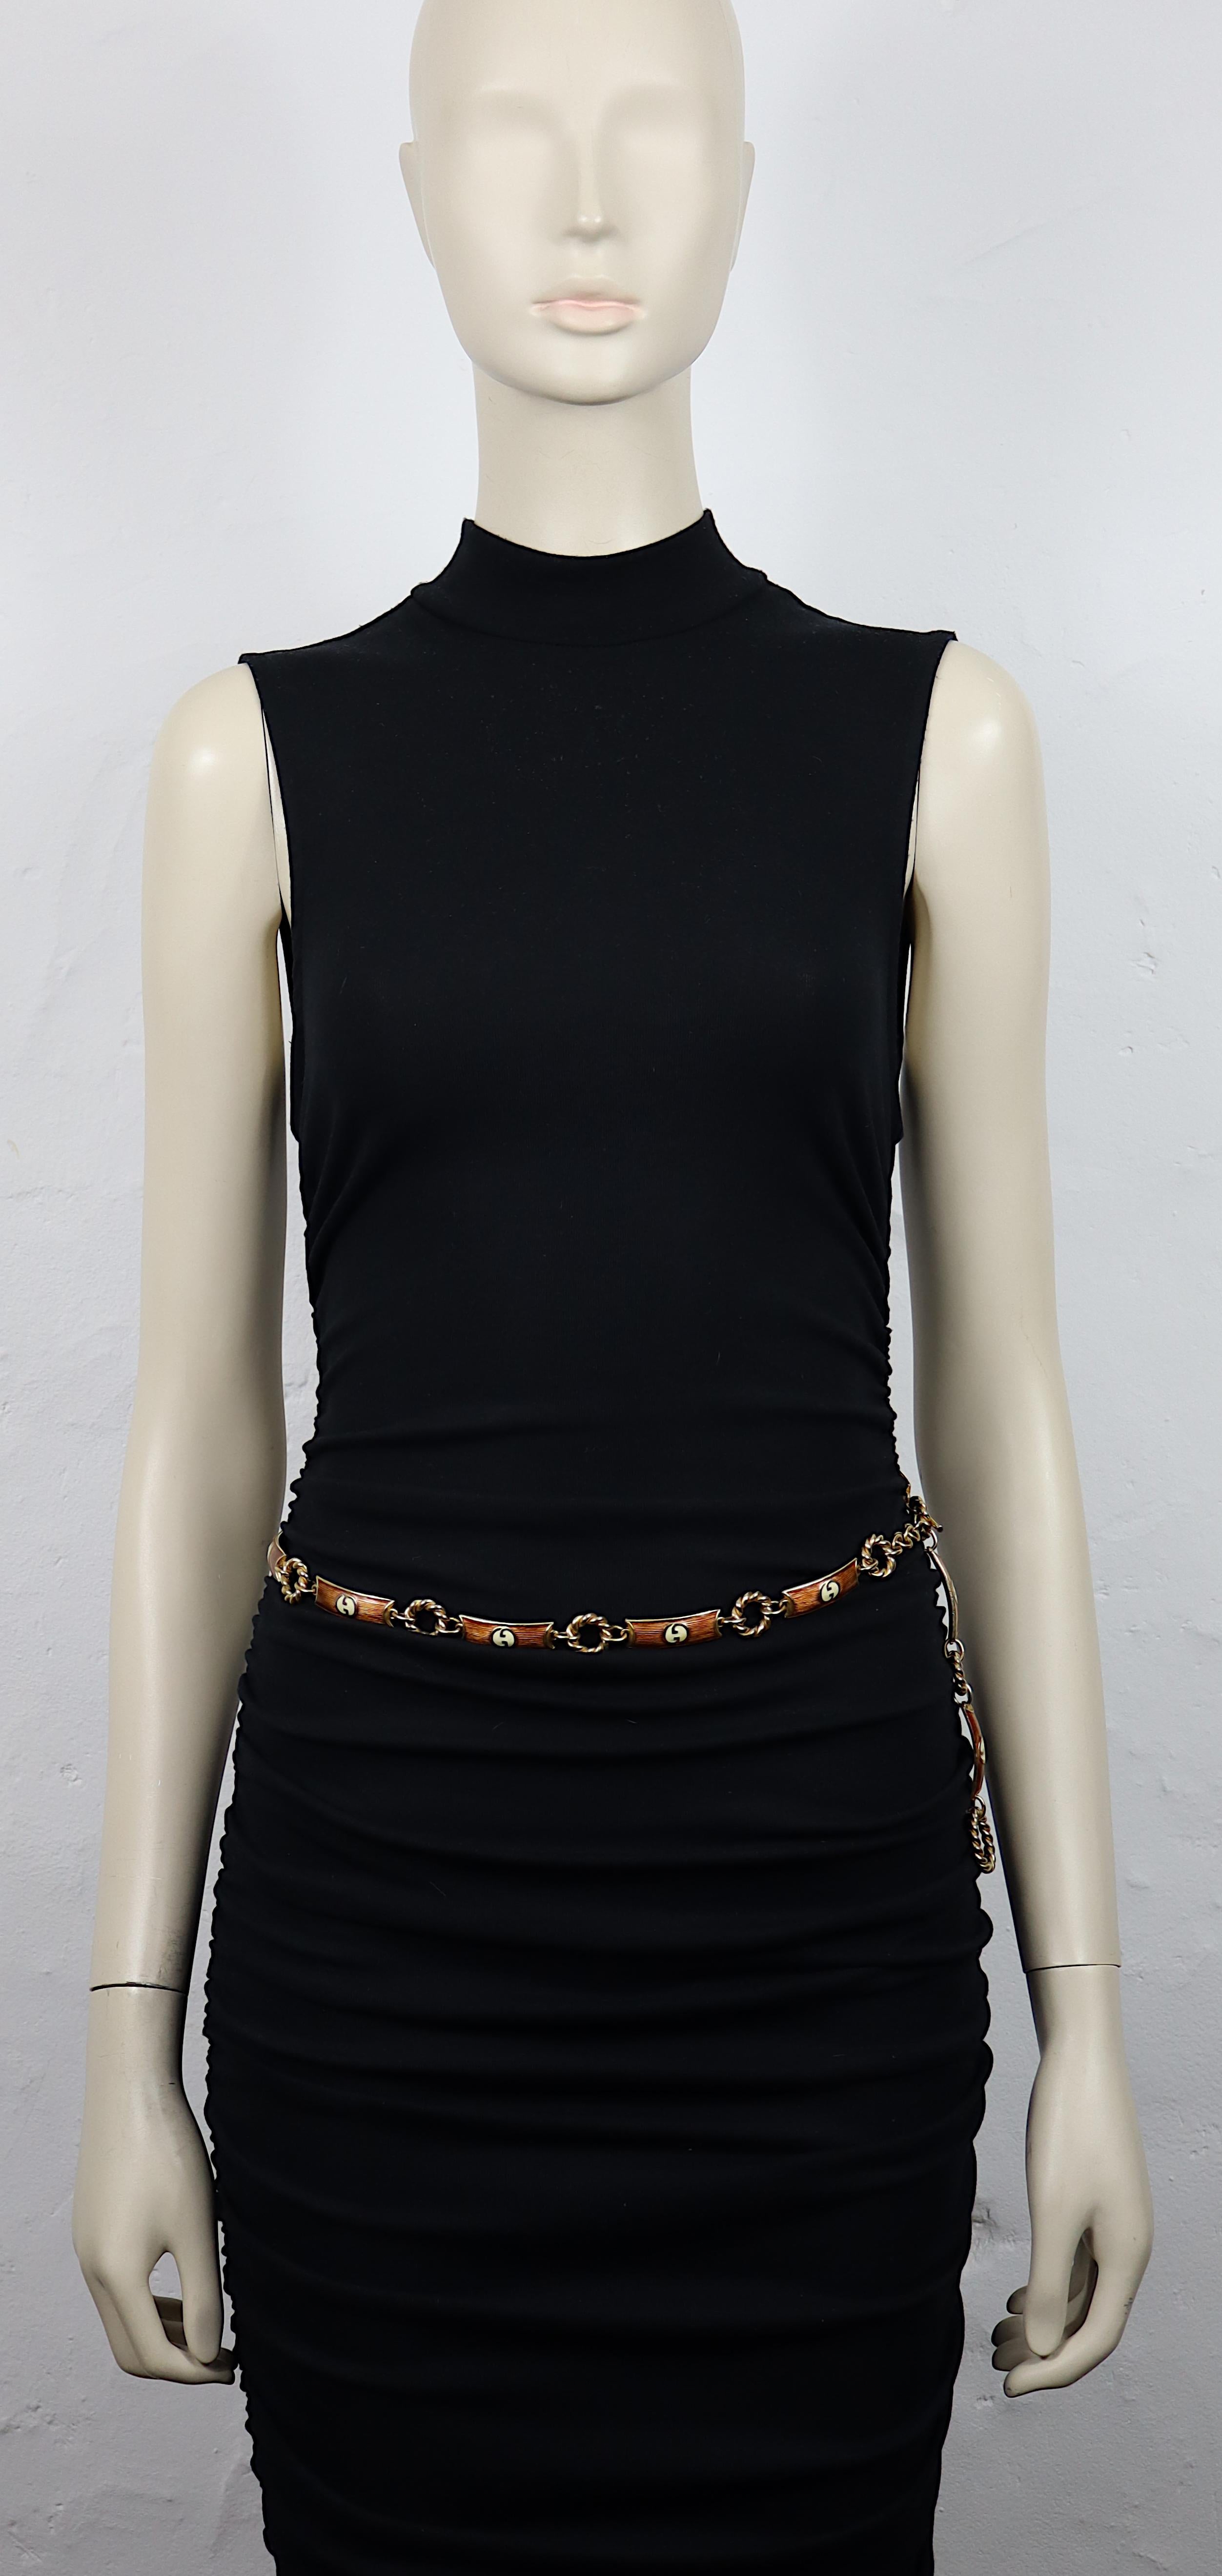 GUCCI vintage belt featuring rectangular gold tone links alternating with braid rings. The rectangular links are overlaid with brown enamel and, at the center, gold tone GG logos with off-white enamel.

Ajustable T-bar toggle closure.
The T-bar